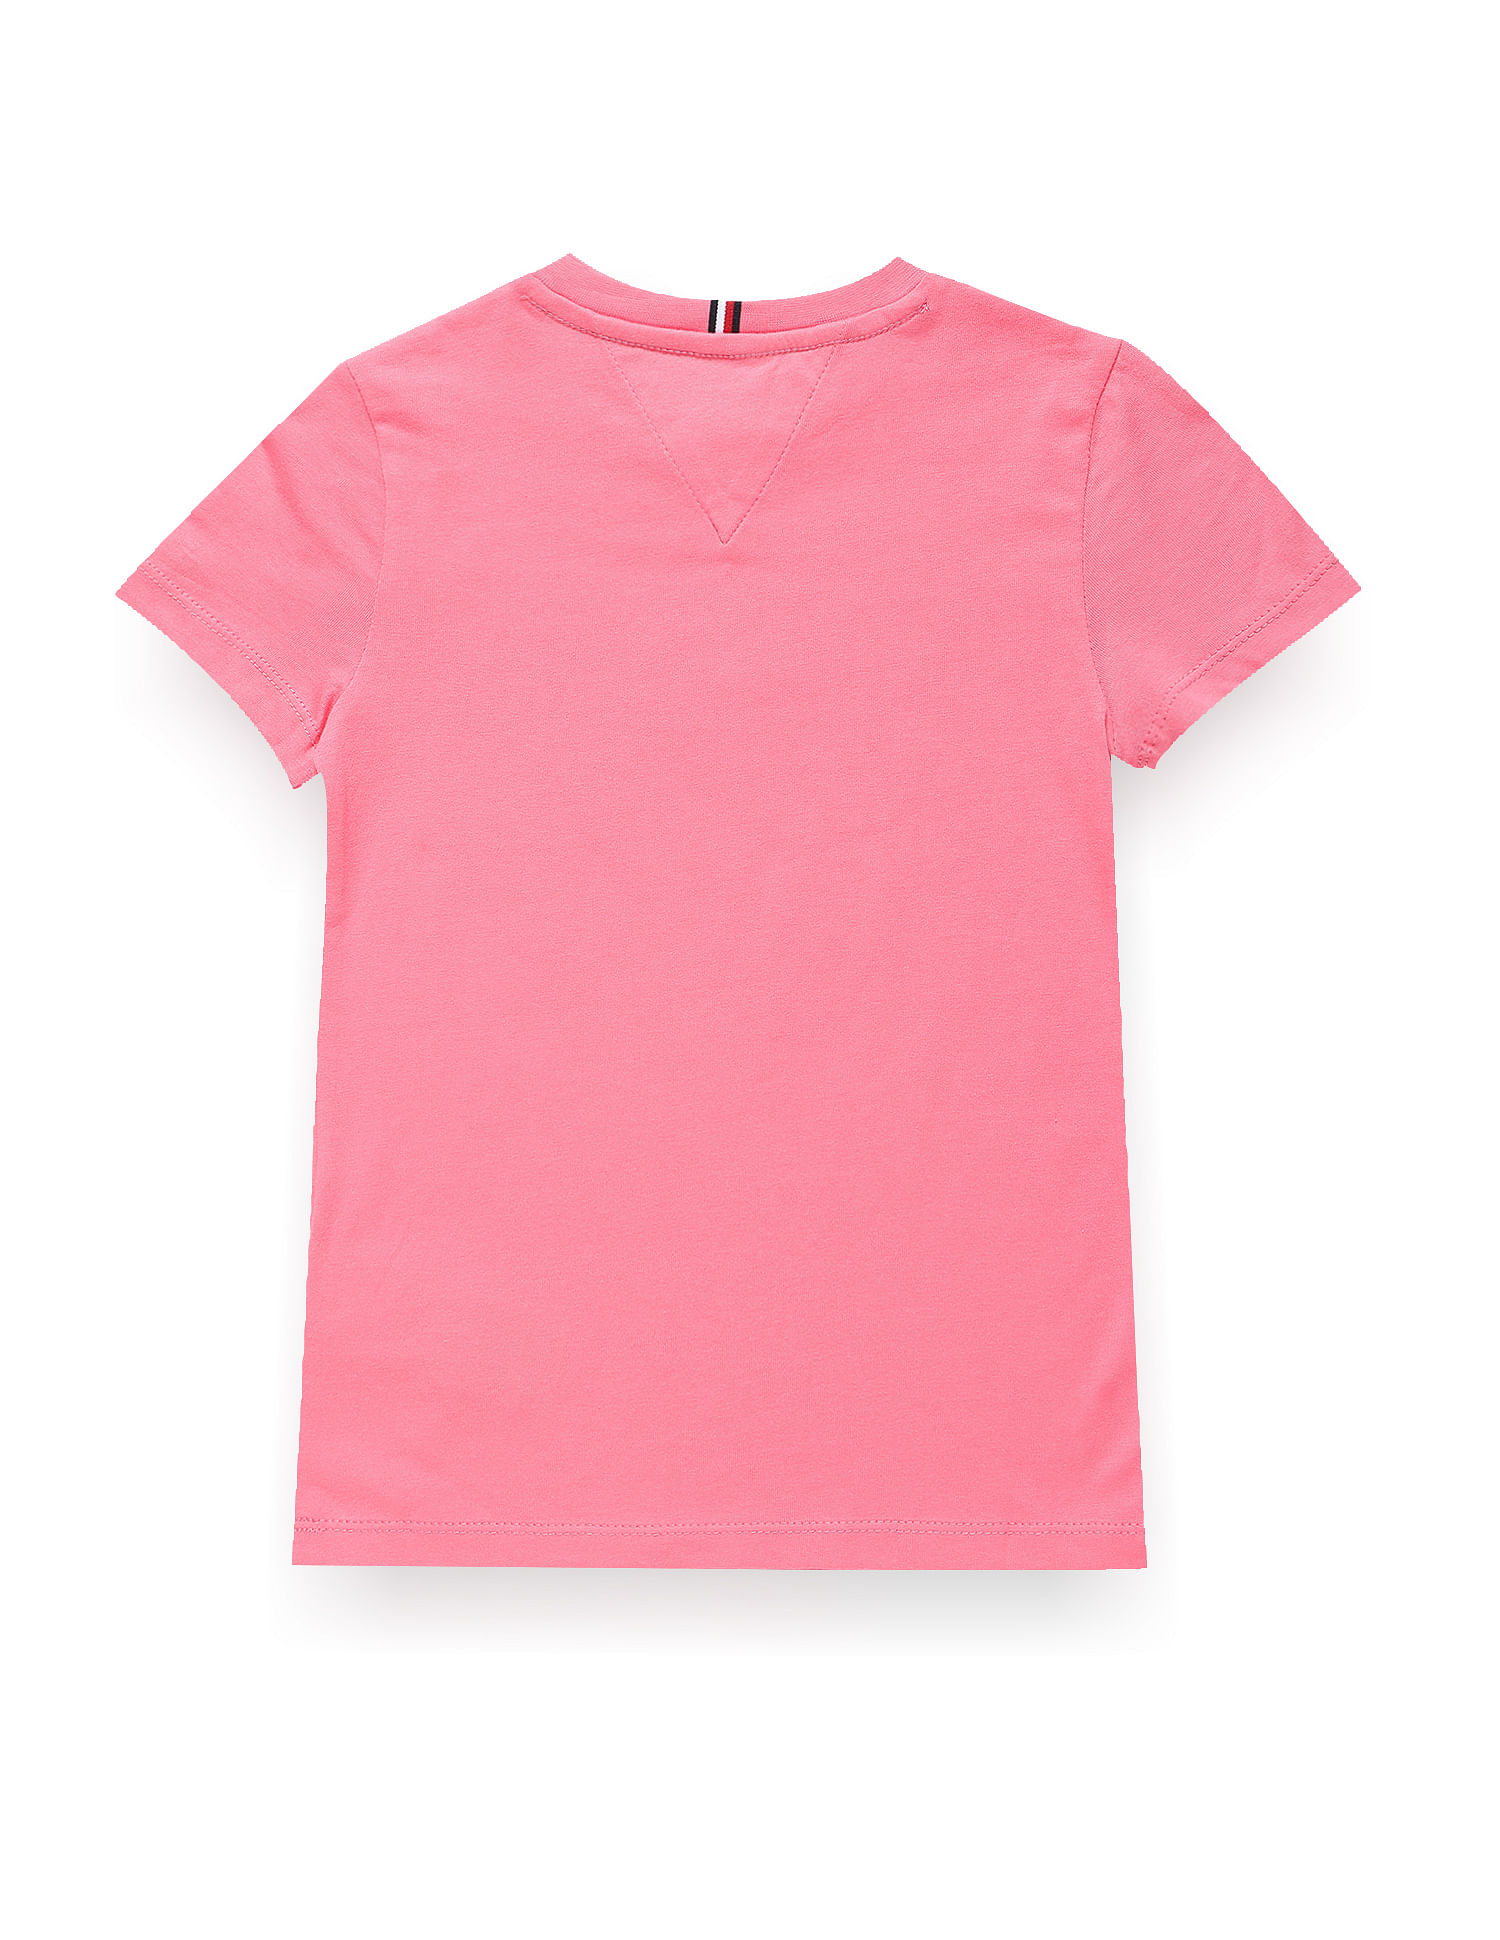 Buy Tommy Hilfiger Kids Girls Essential Sustainable T-shirt